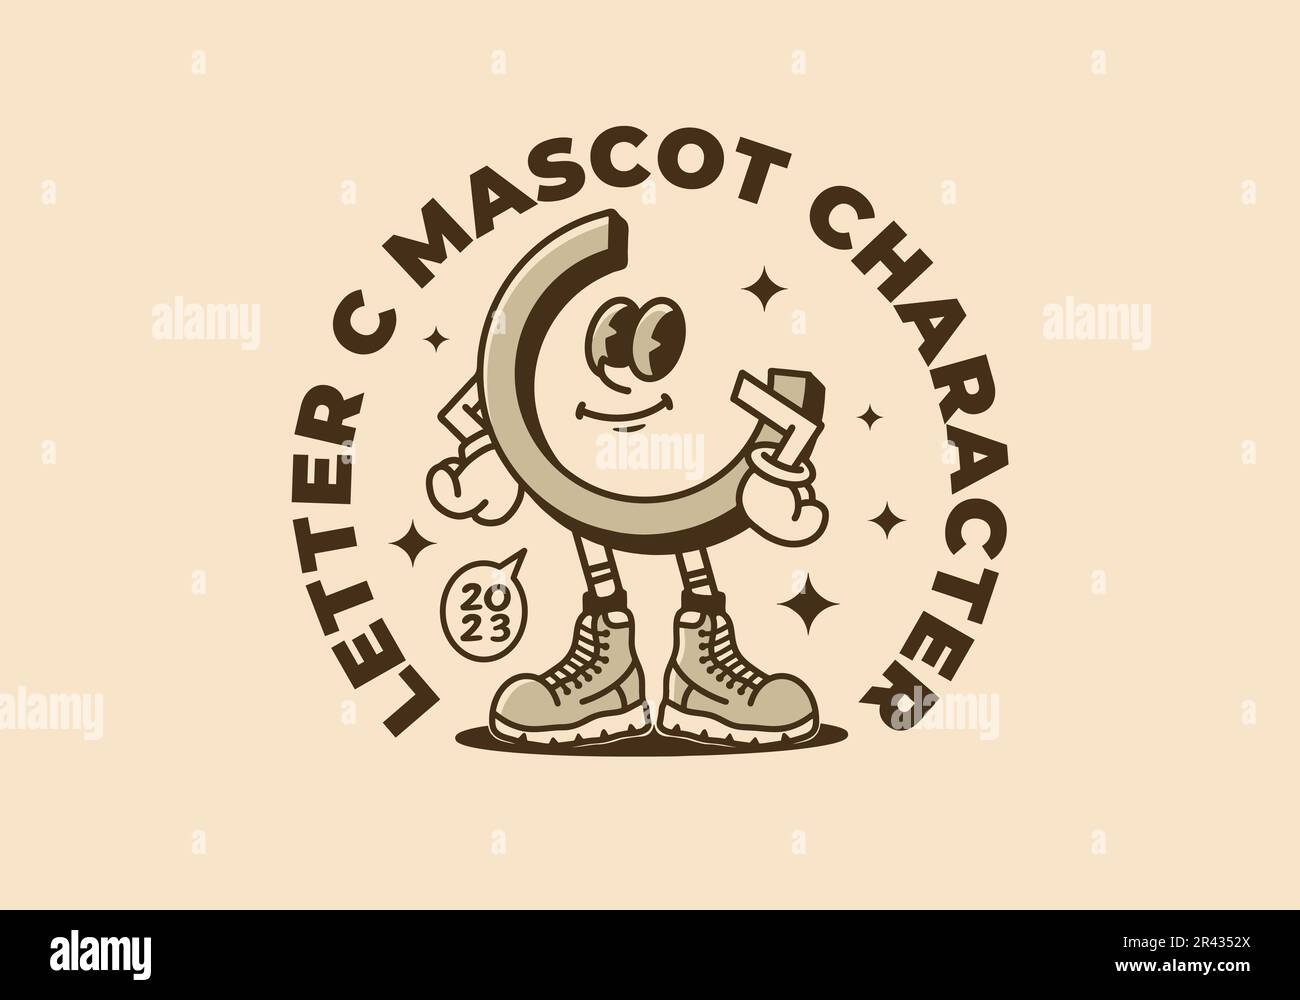 Mascot character illustration design of a letter C in a cocky style Stock Vector